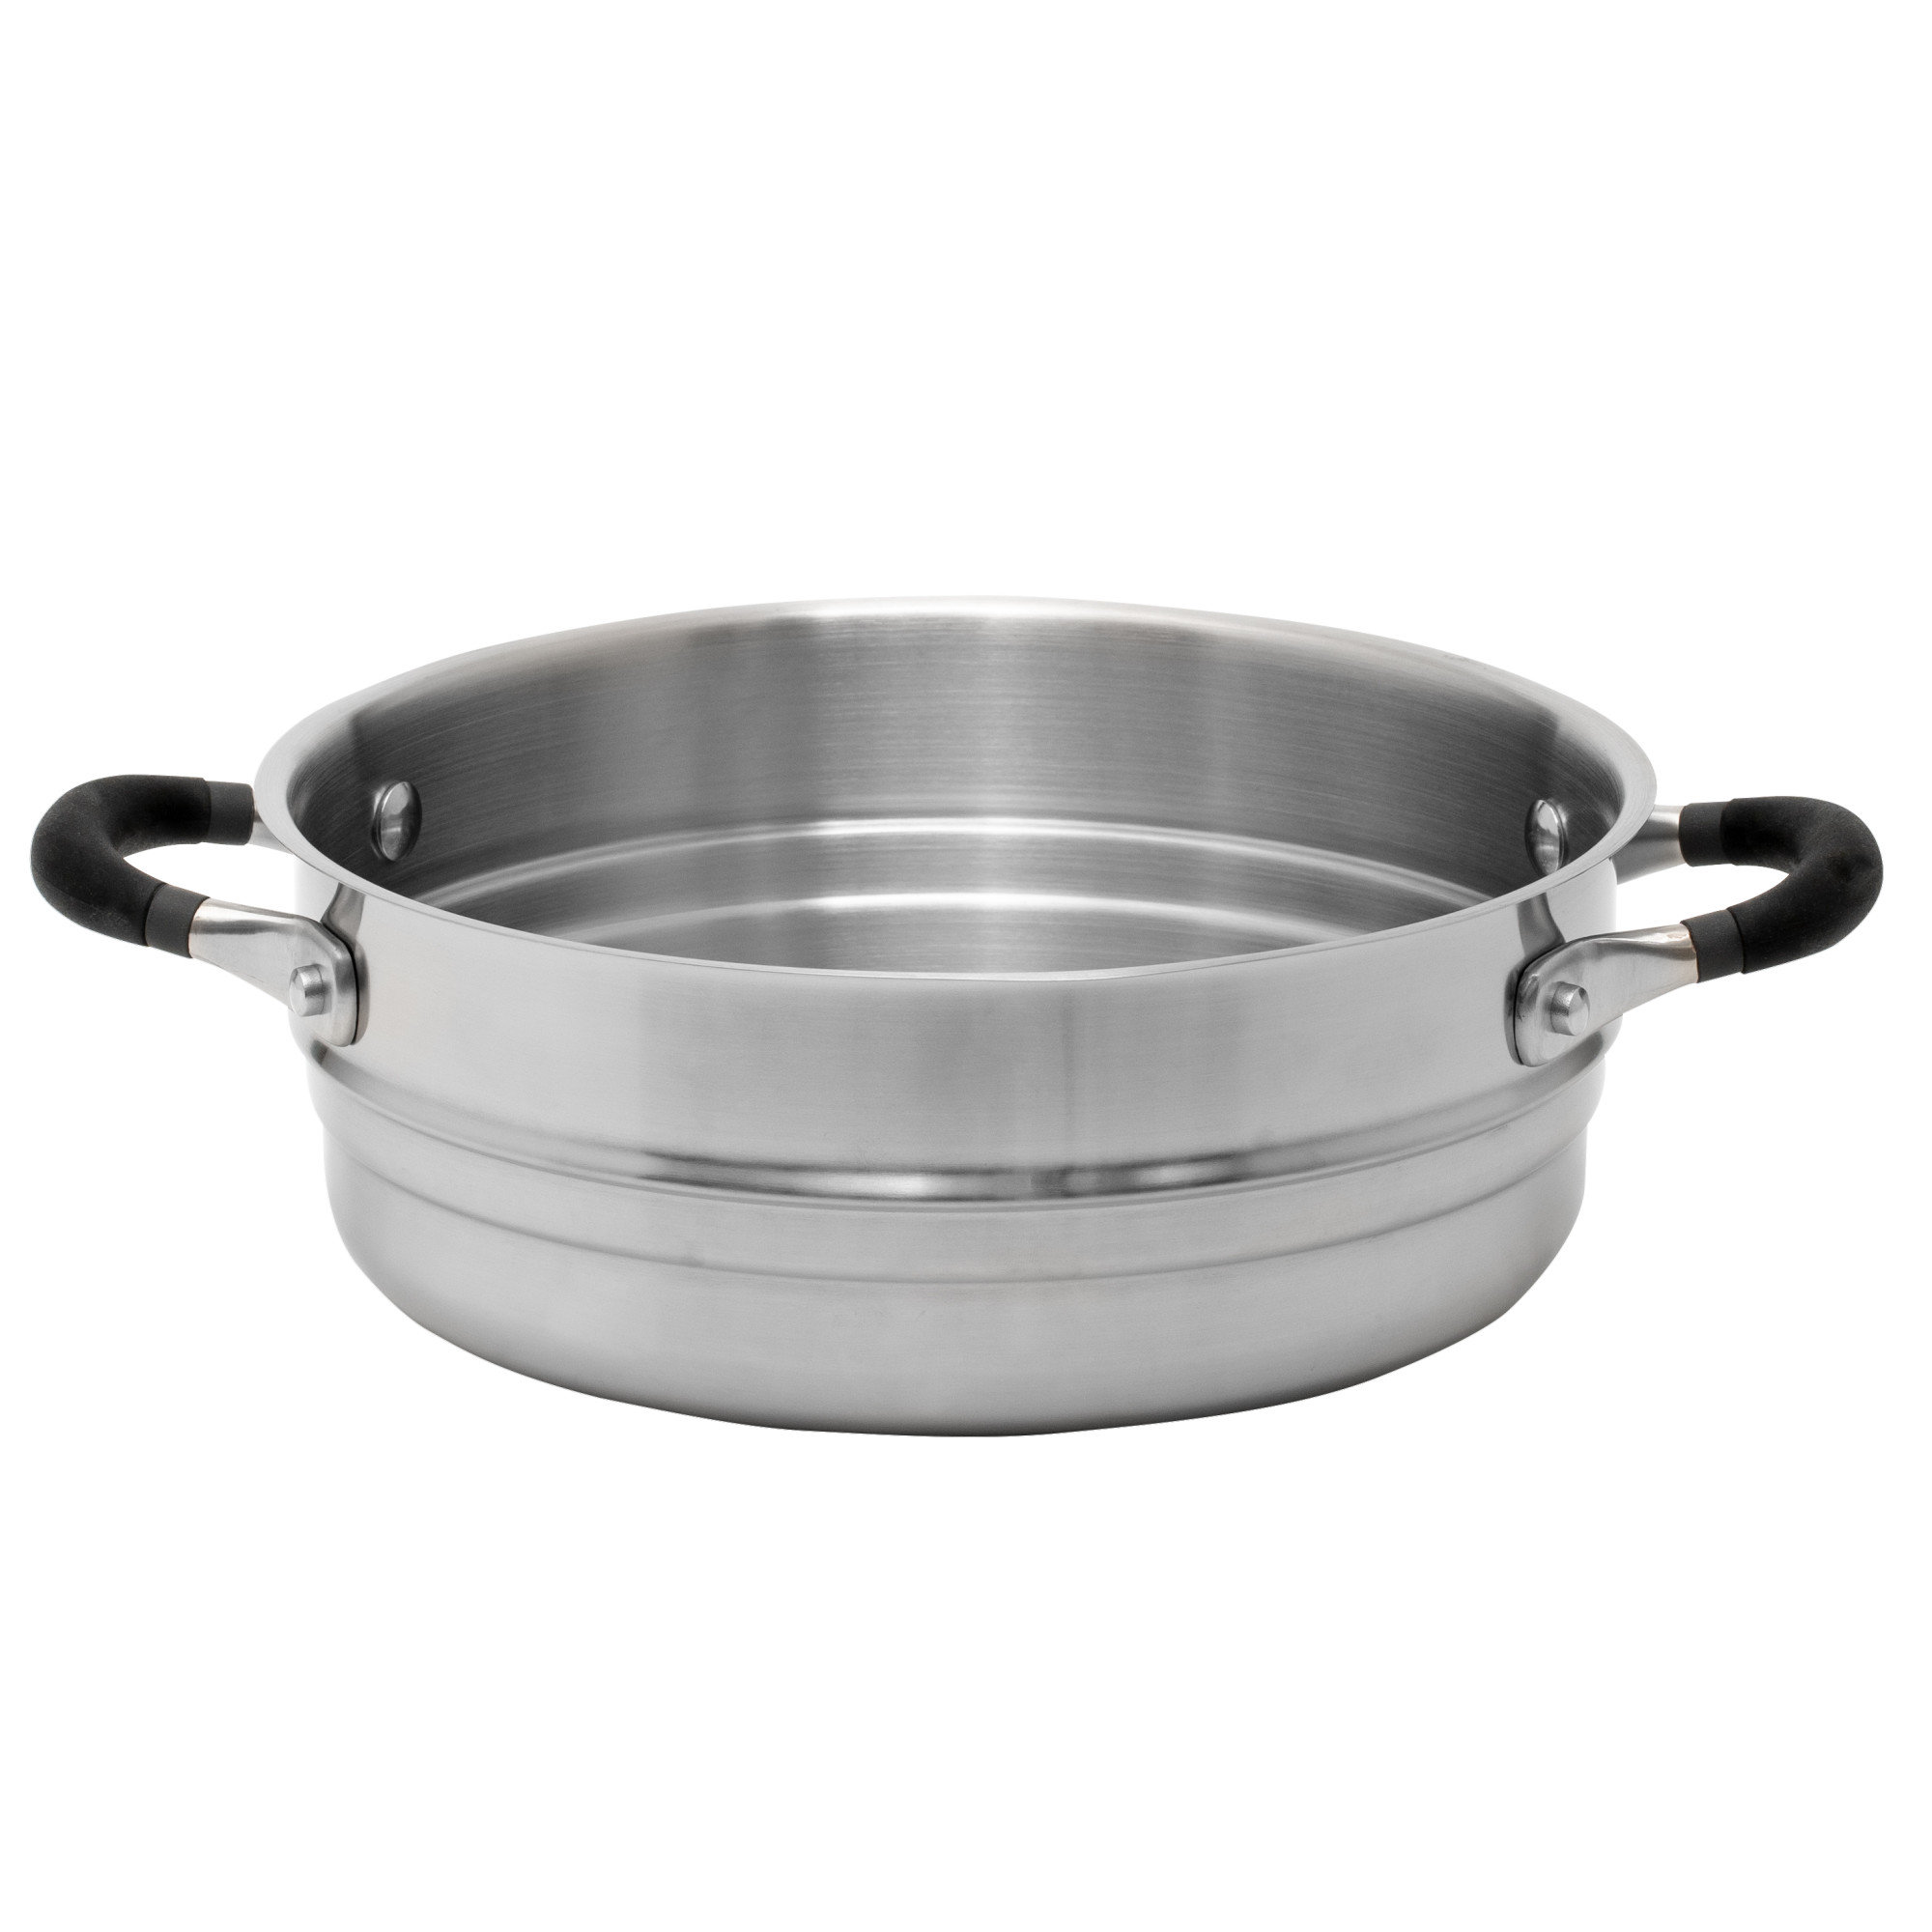 All-Clad Specialty Stainless Steel Universal Steamer for Cooking 8 Inch  Food Steamer, Steamer Basket Silver